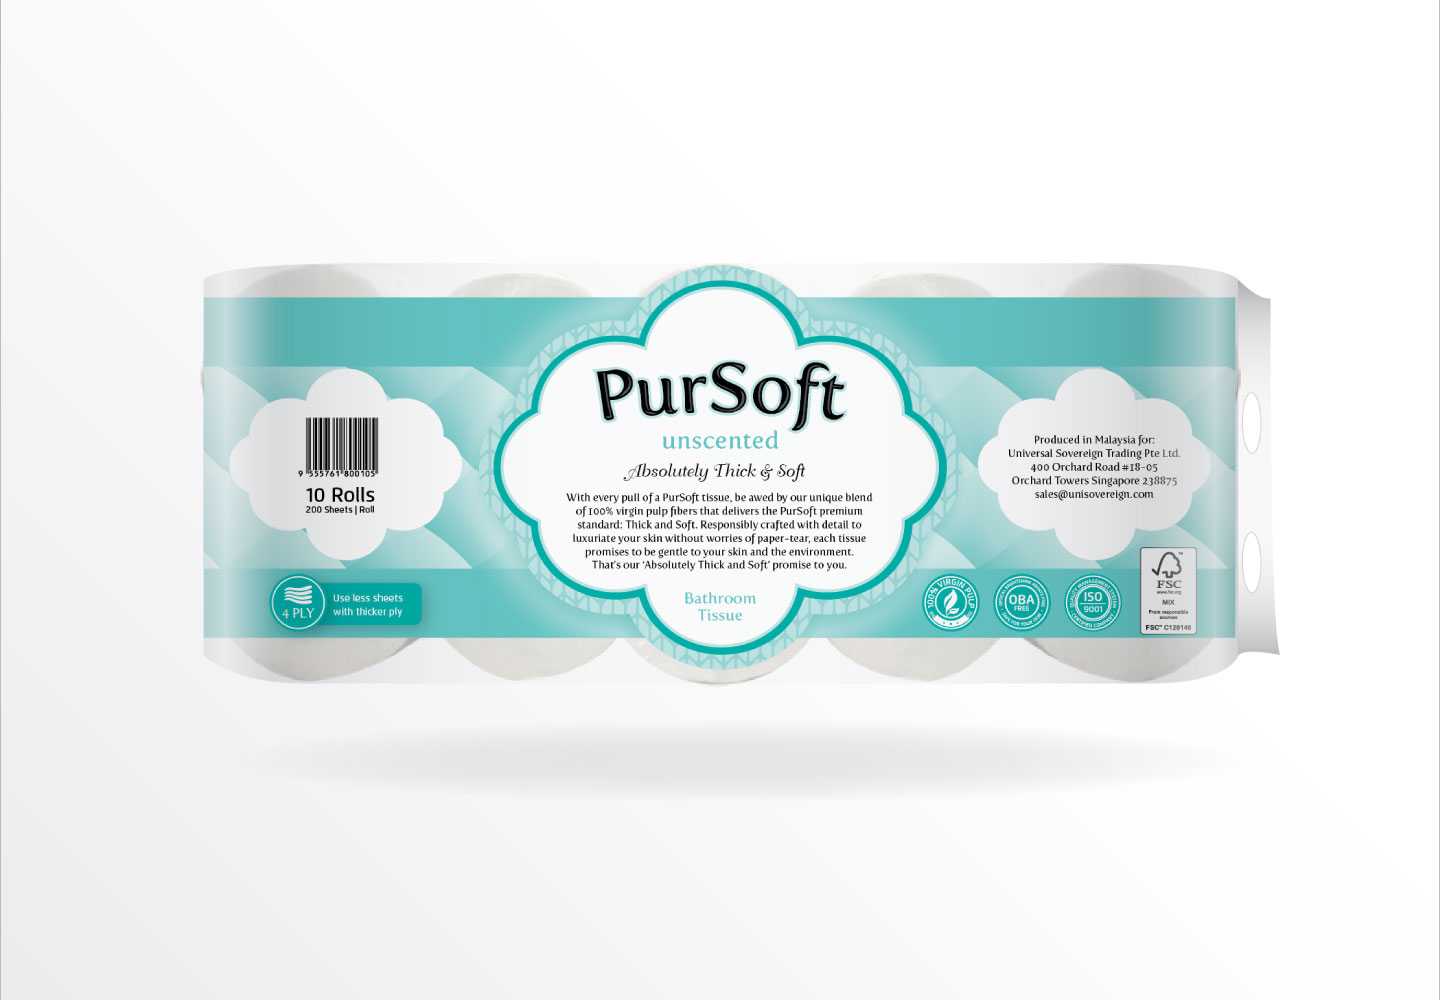 Brand Consultancy in FMCG Industry. Packaging design for Pursoft.